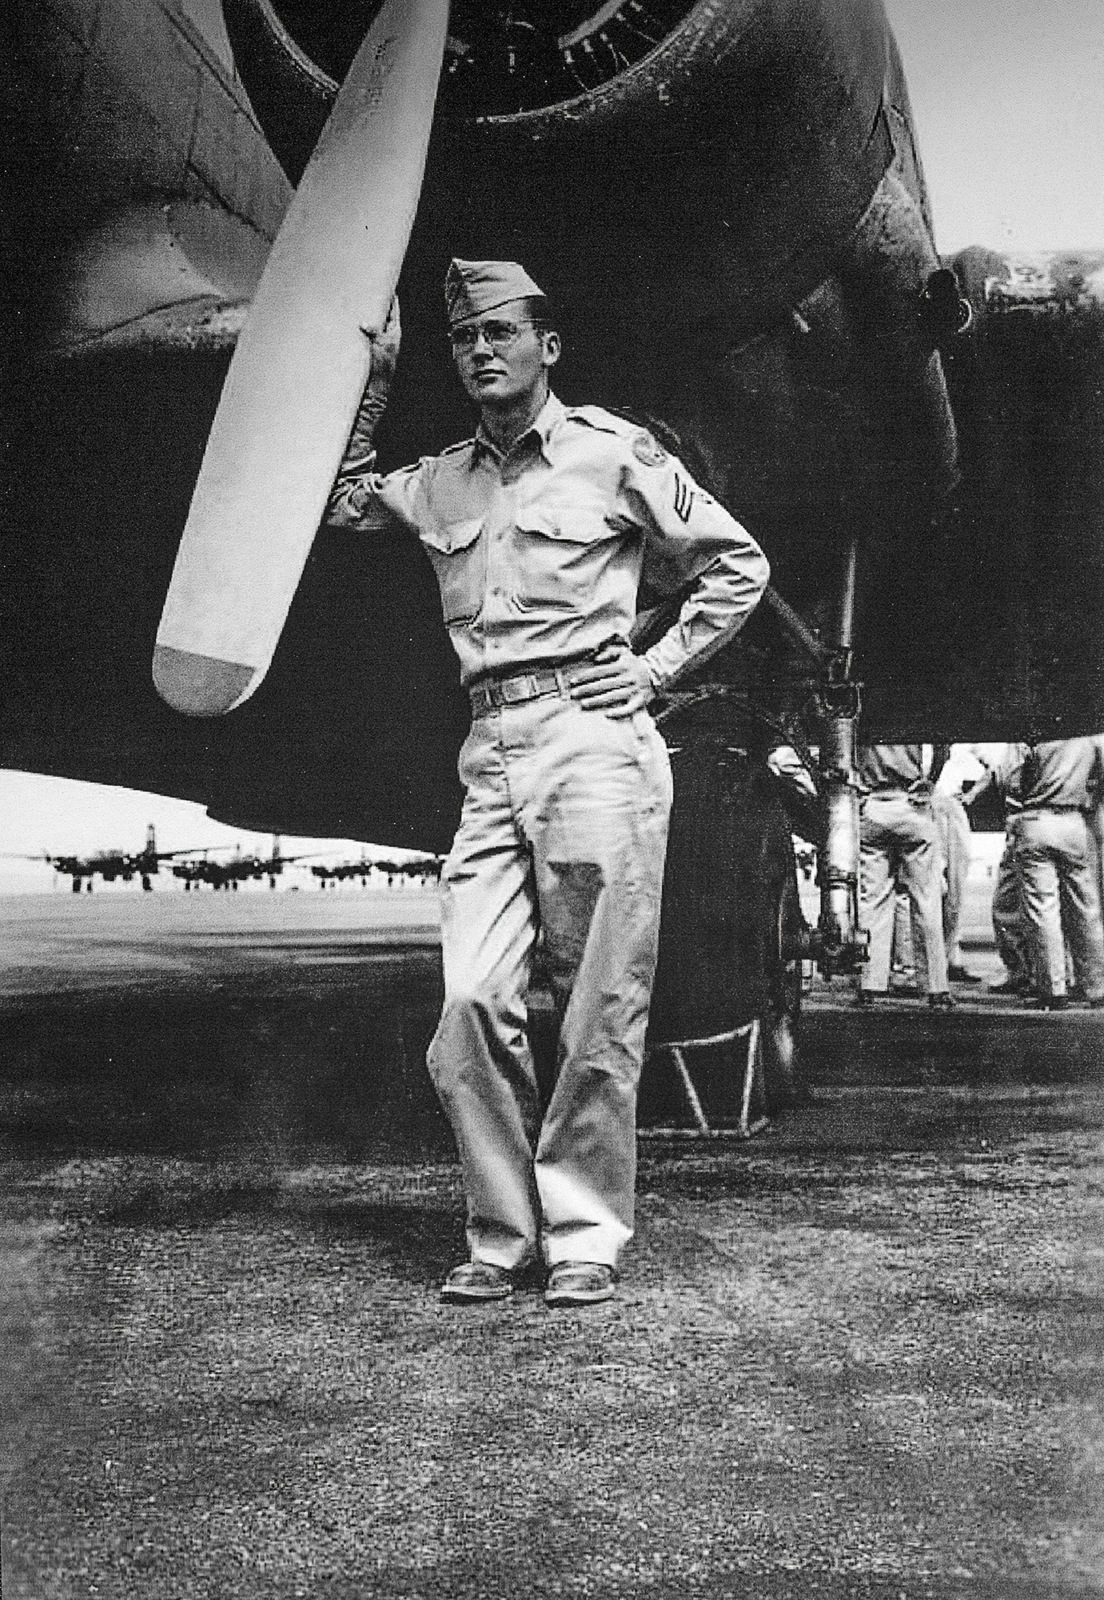 A black and white photograph of Robert Clark, in uniform, standing by an airplane at Hobbs Army Air Field, Hobbs, New Mexico, 1947